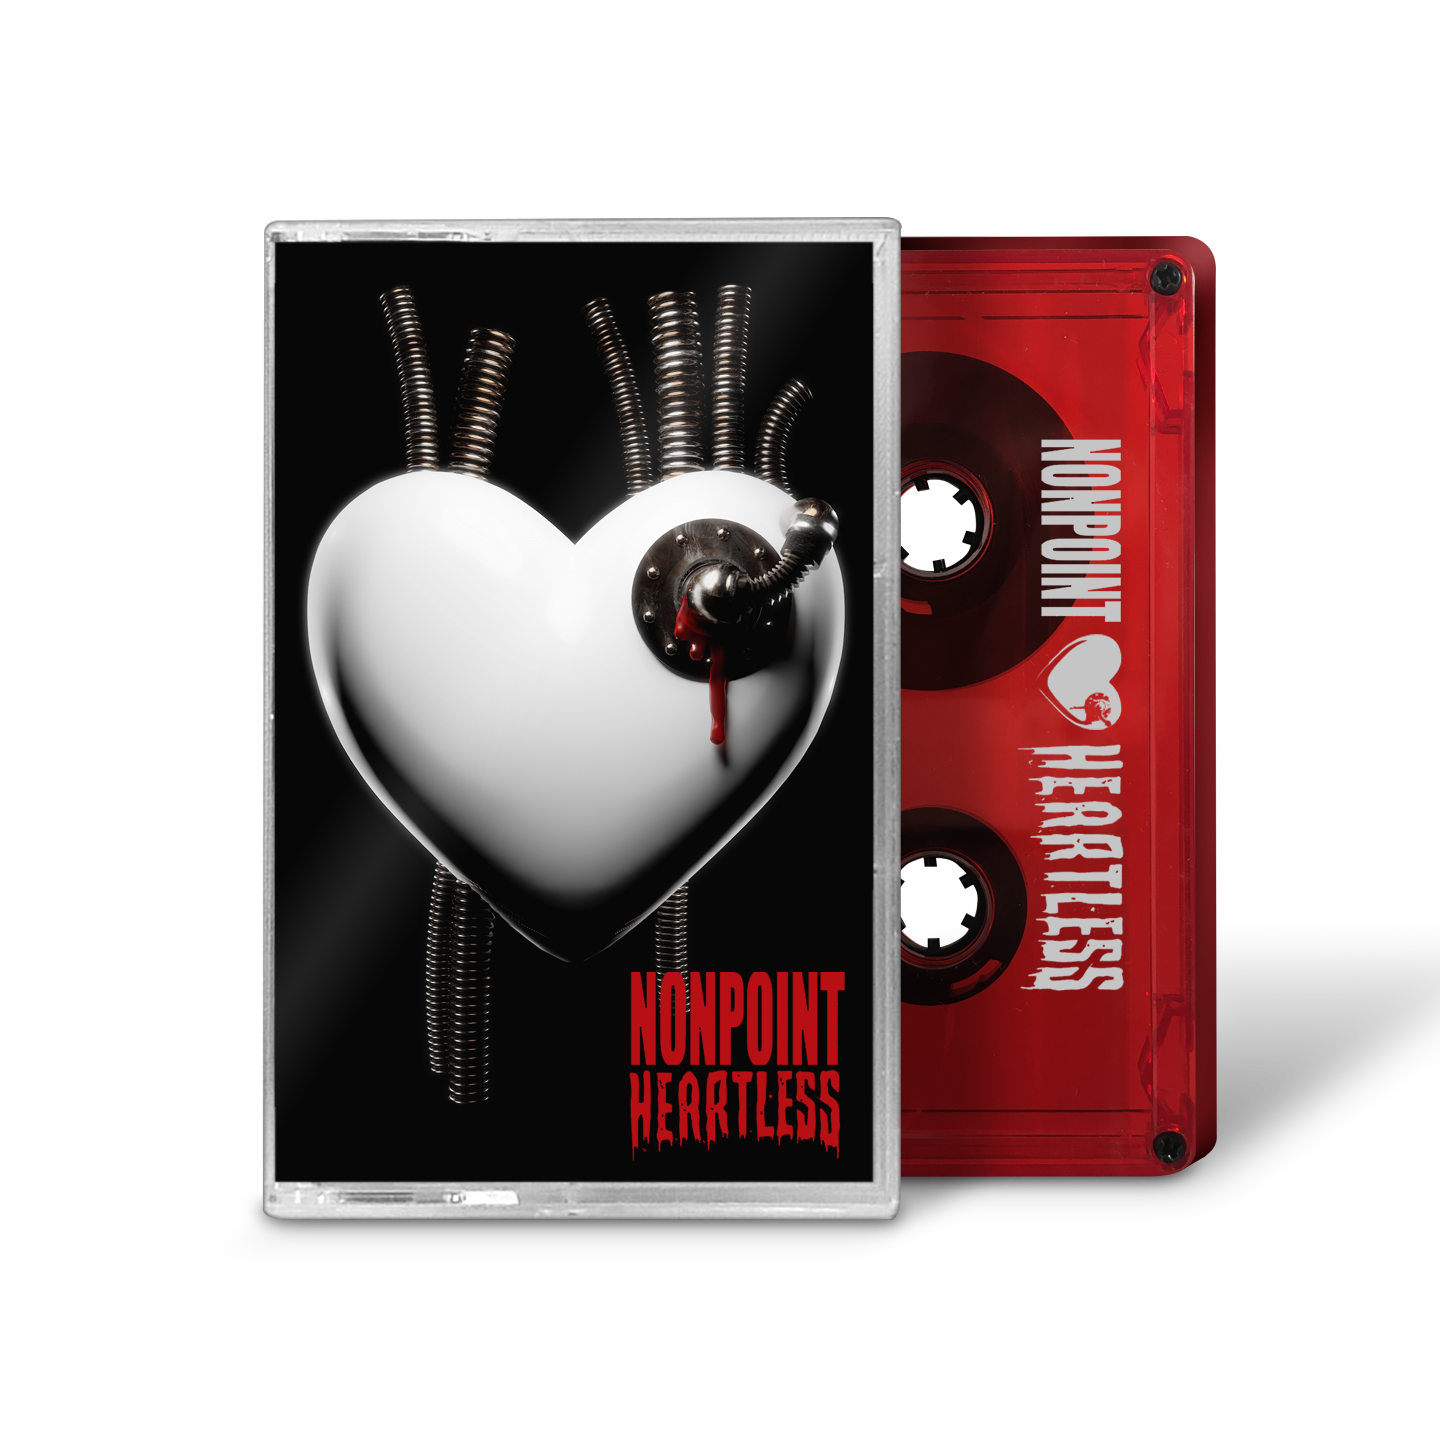 Heartless EP Limited Edition Cassette